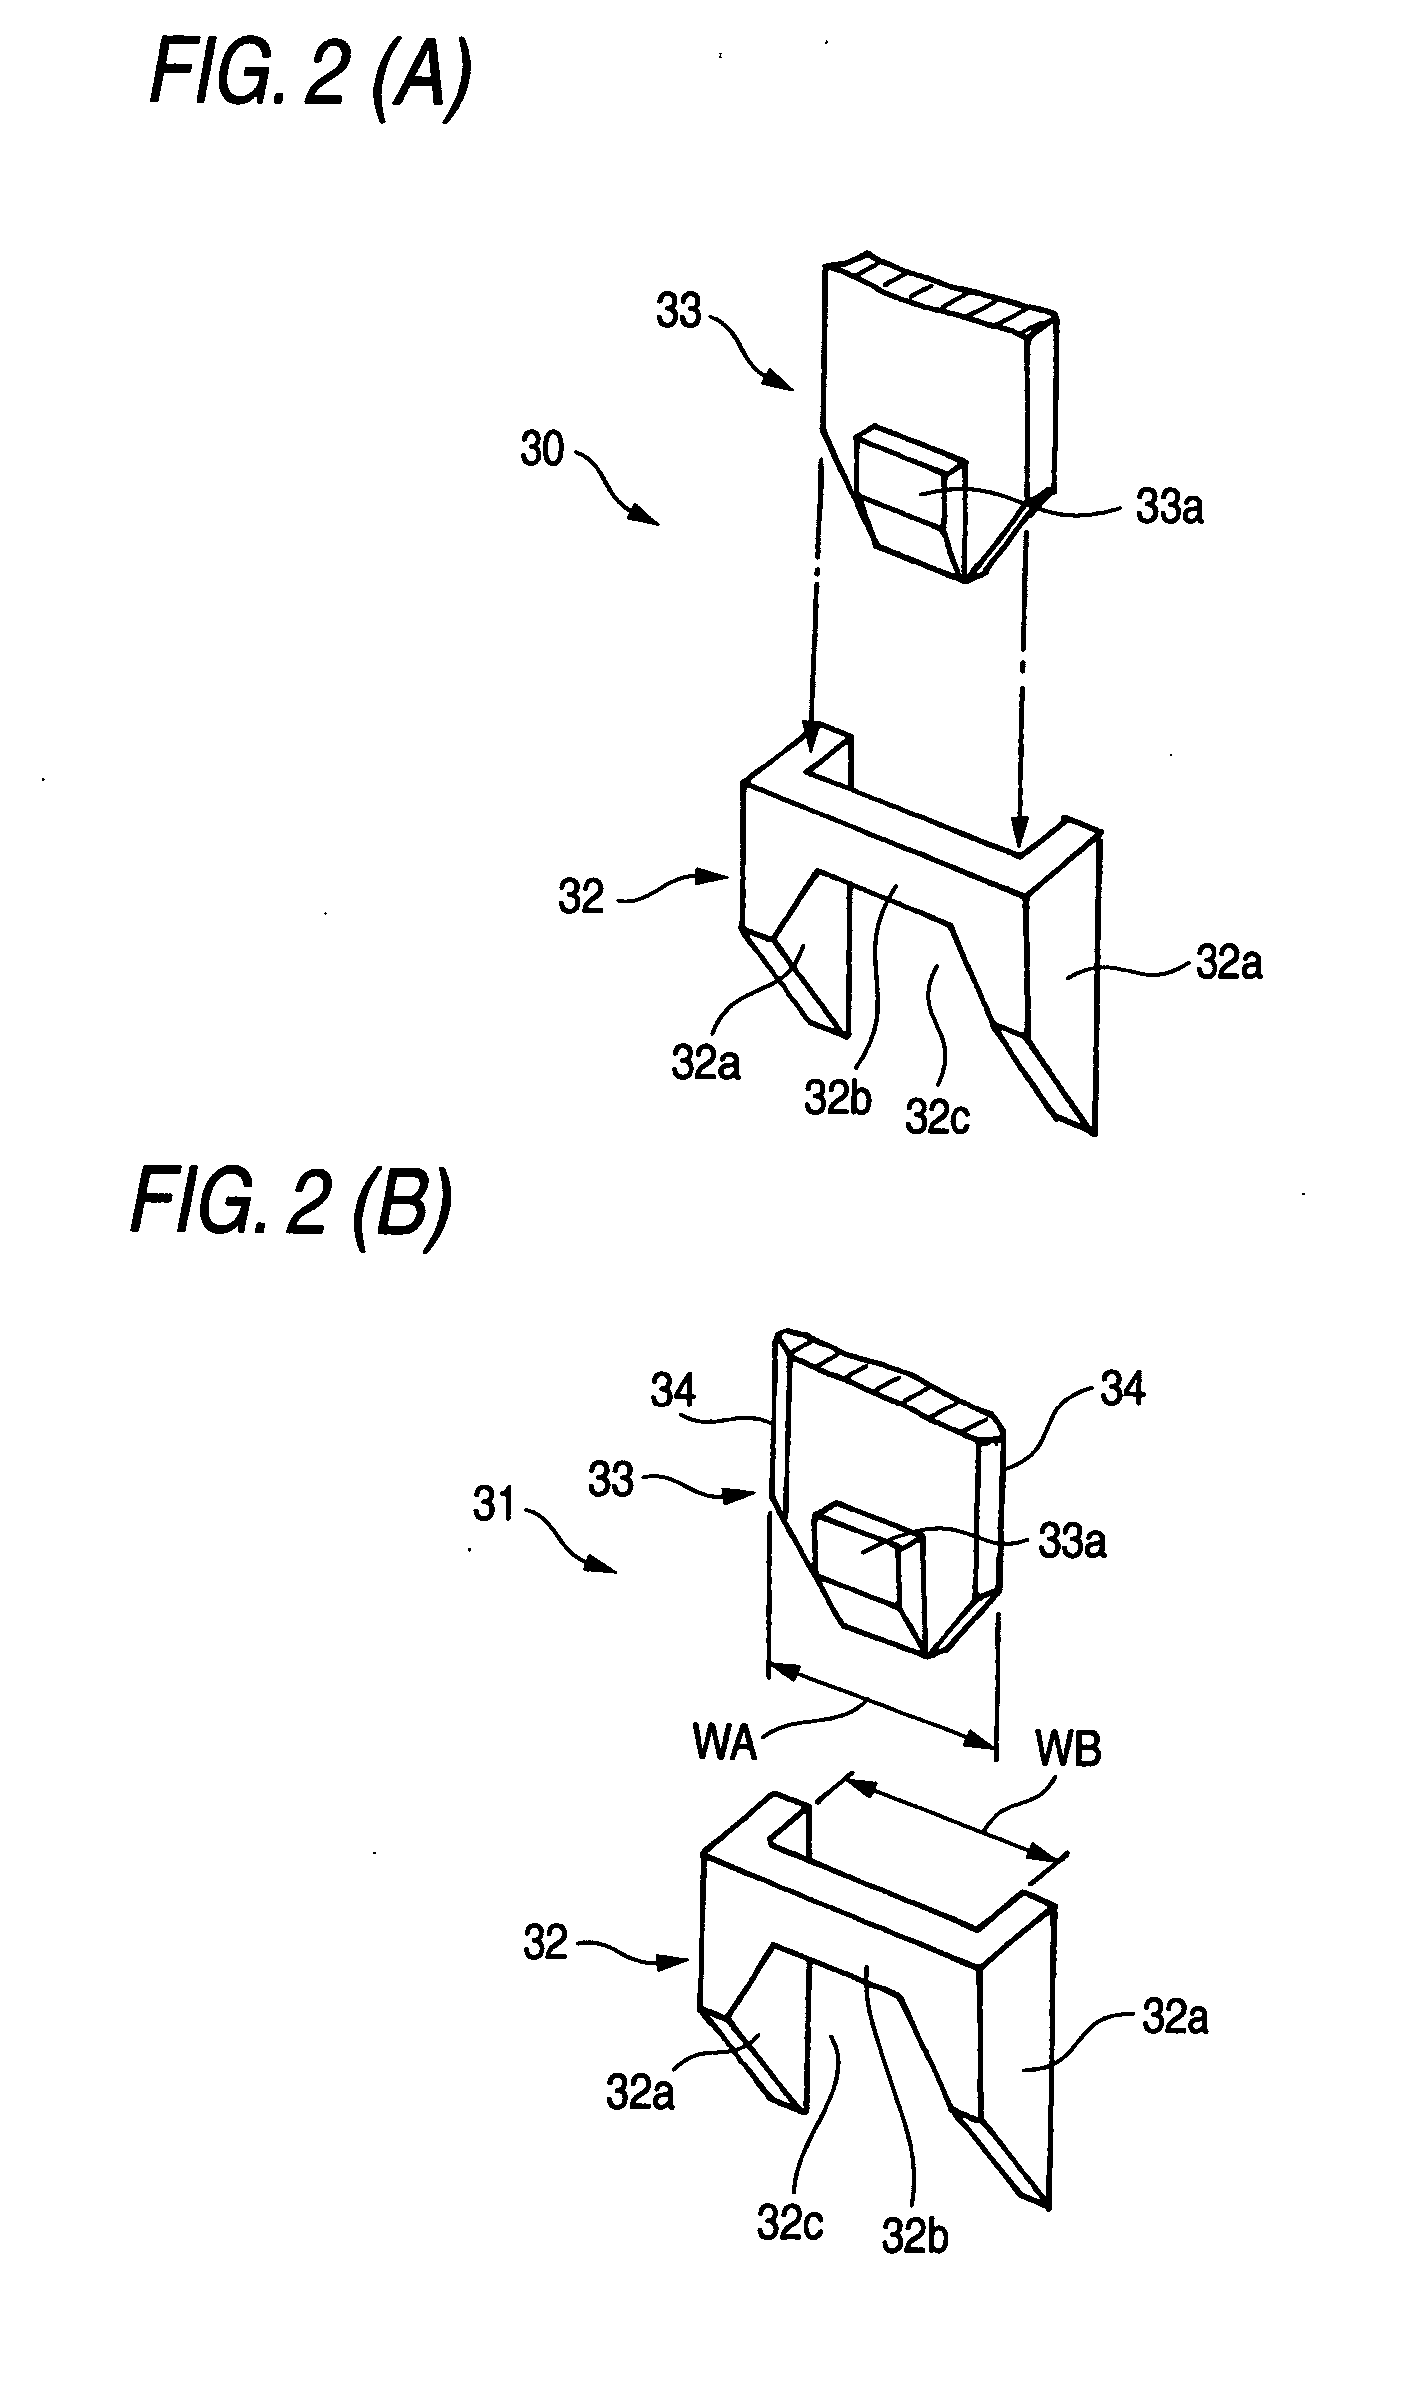 Locking structure for protector and wire harness